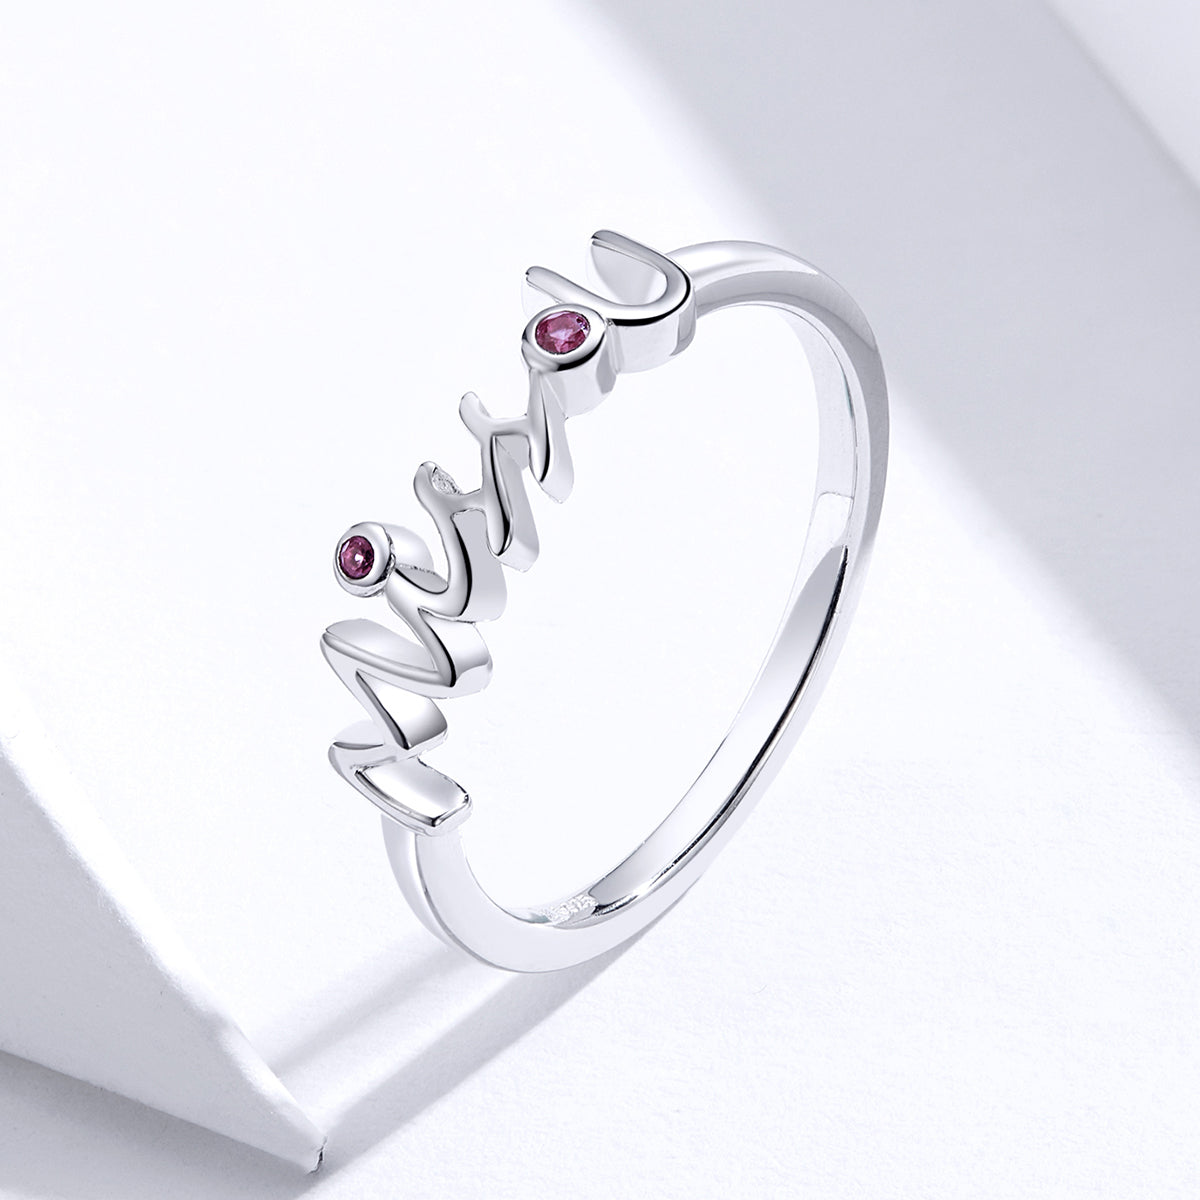 S925 Platinum-Plated Tourmaline Silver Ring for Women (Adjustable) T34 |  LookHealthyStore